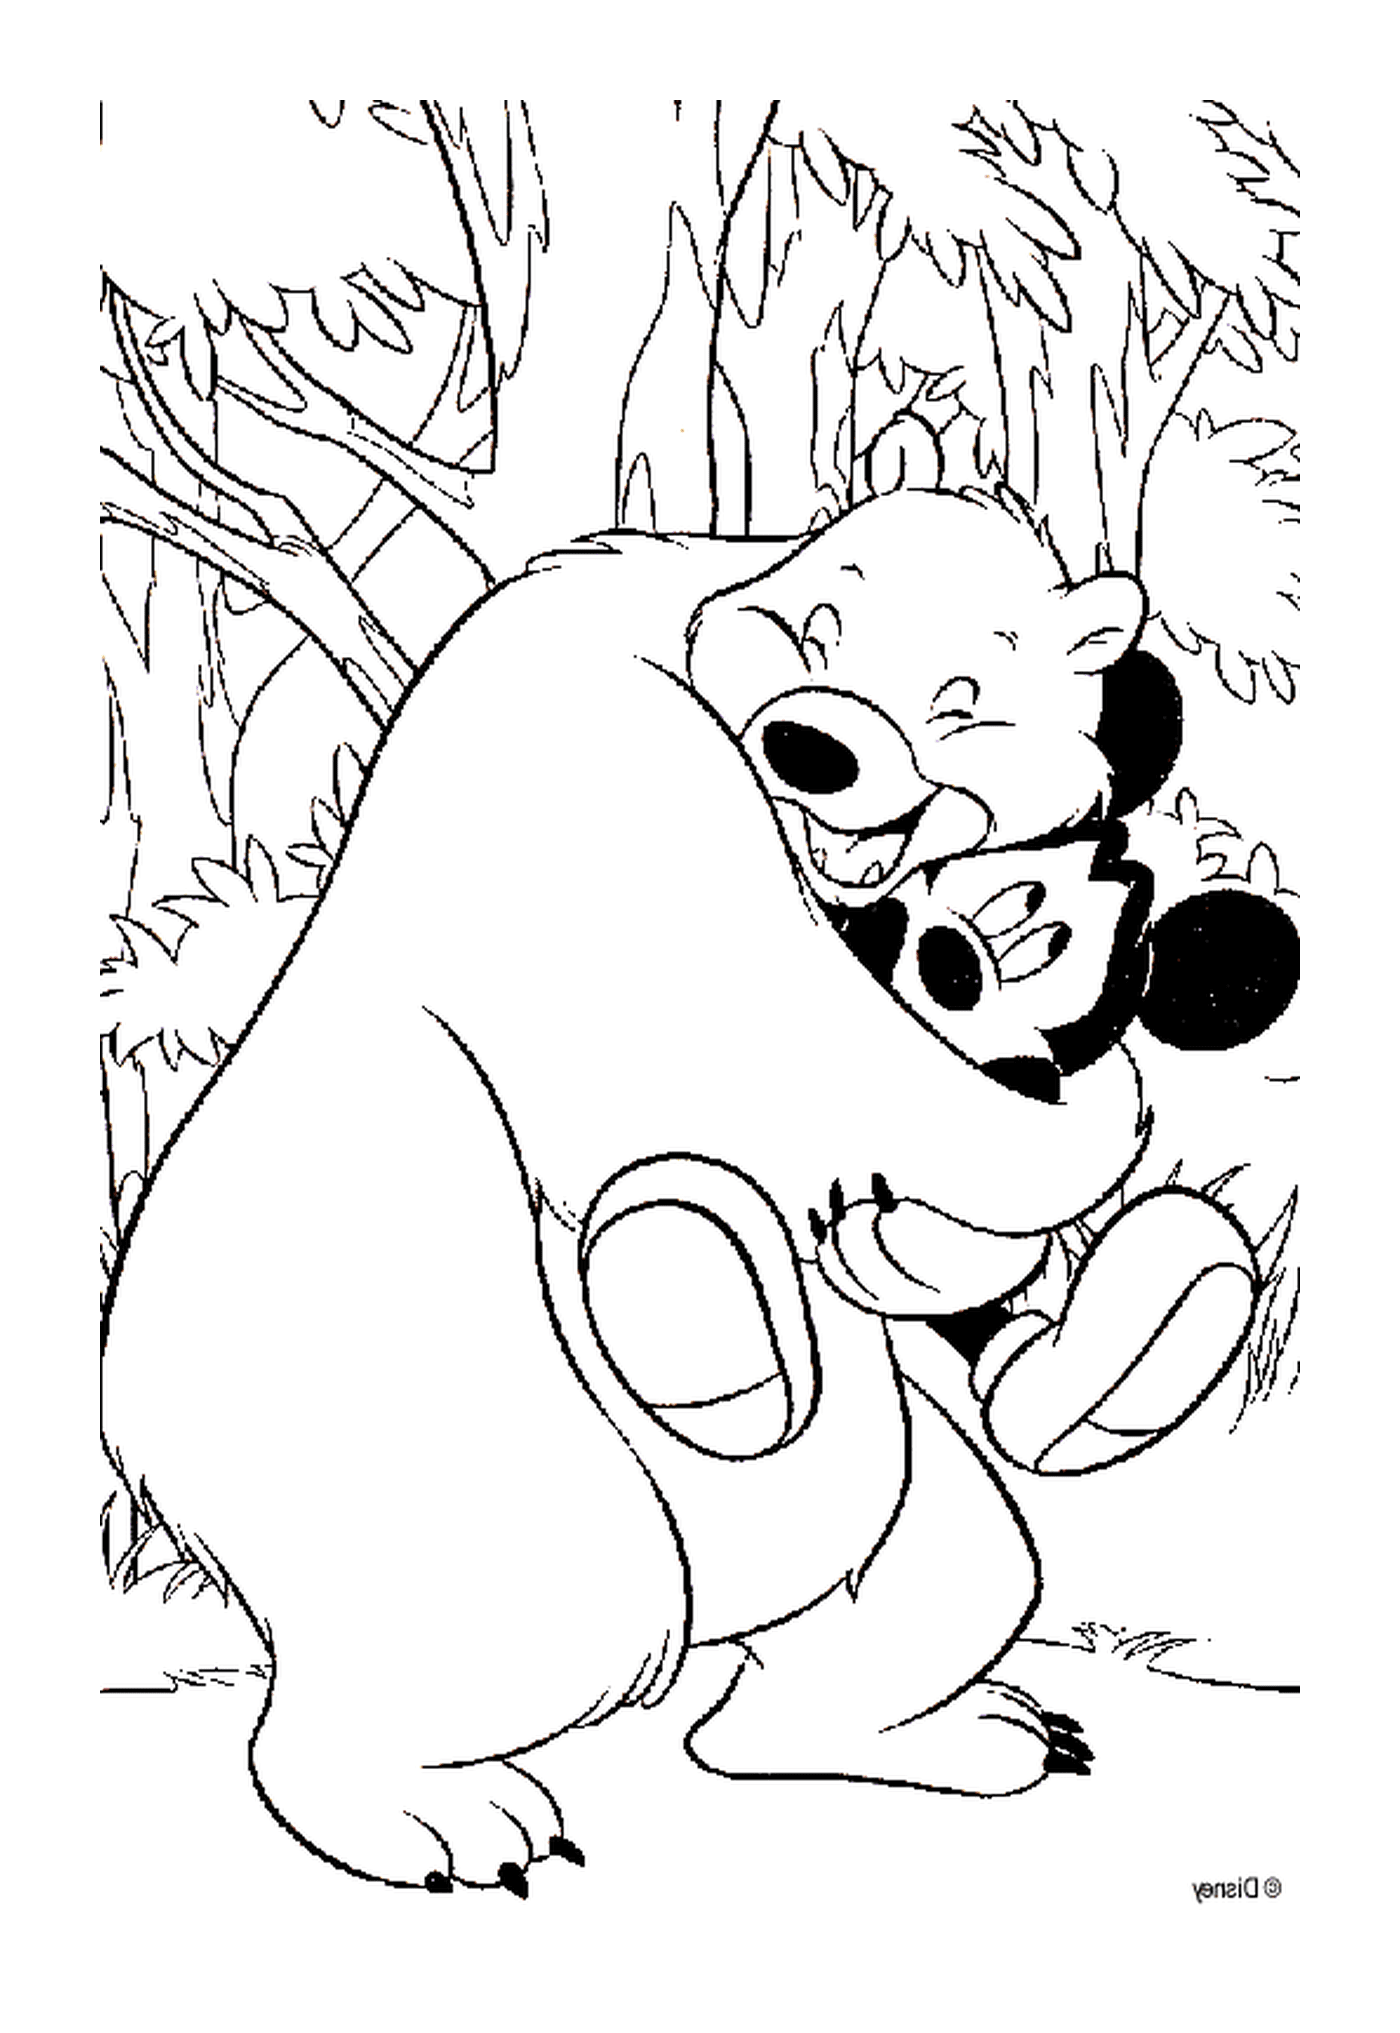   Mickey avec un ours affectueux : un ours câlinant Mickey Mouse 